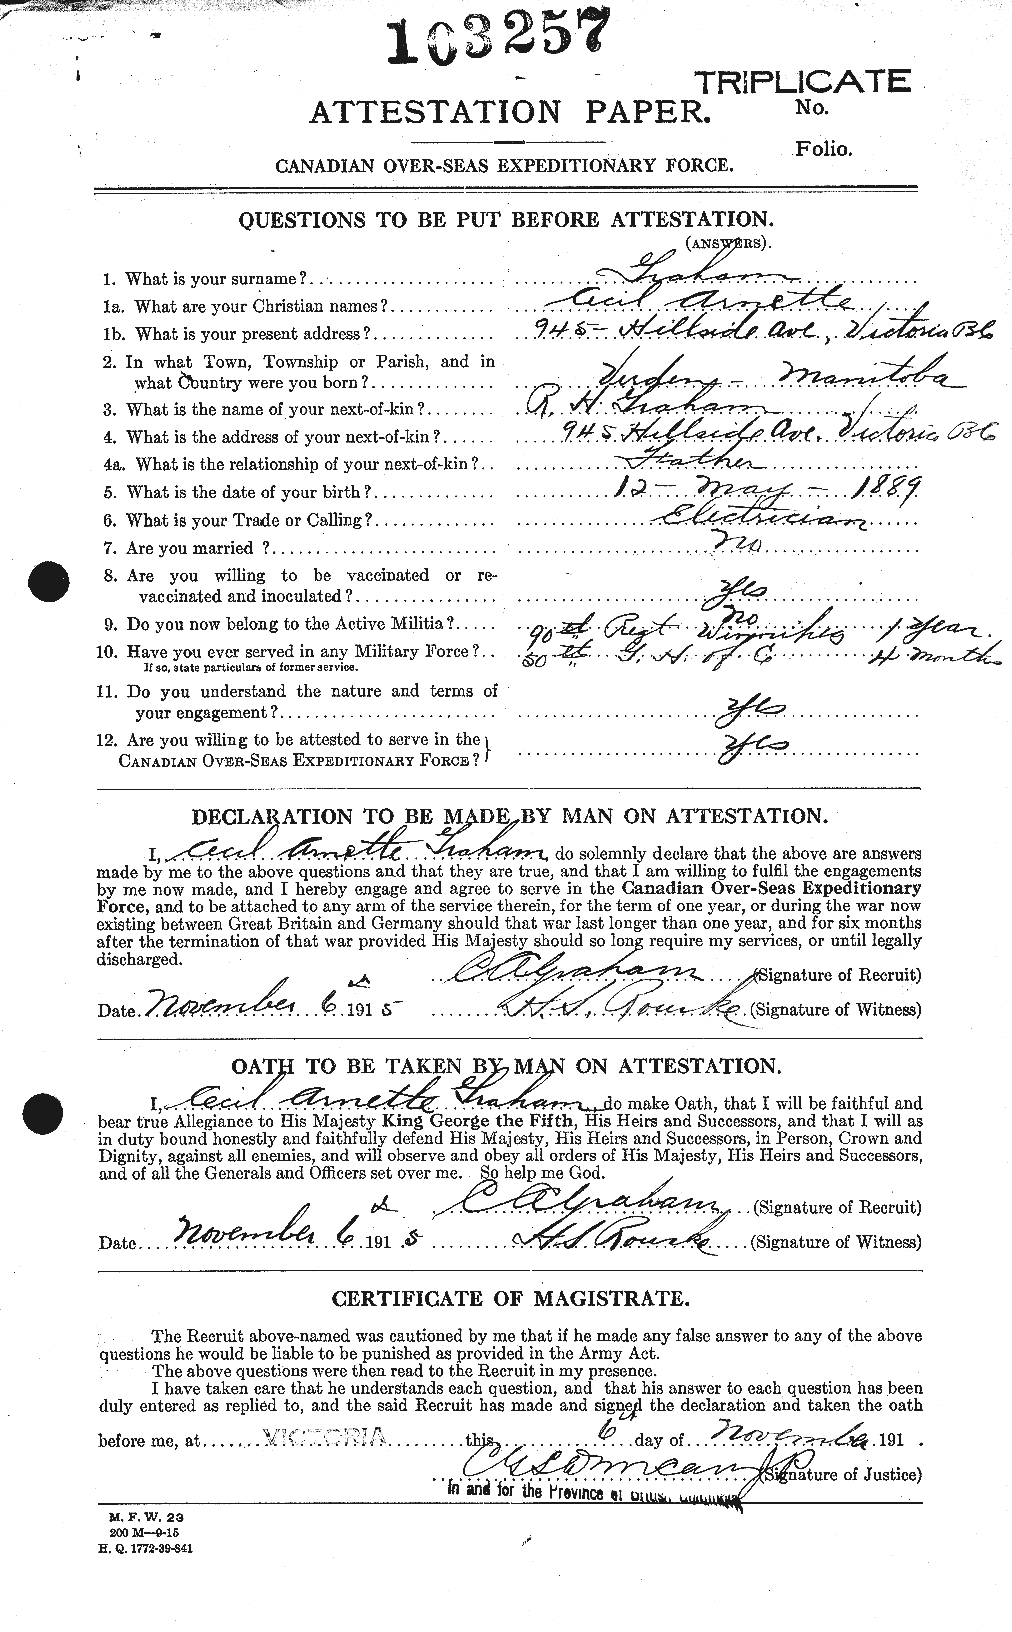 Personnel Records of the First World War - CEF 359681a